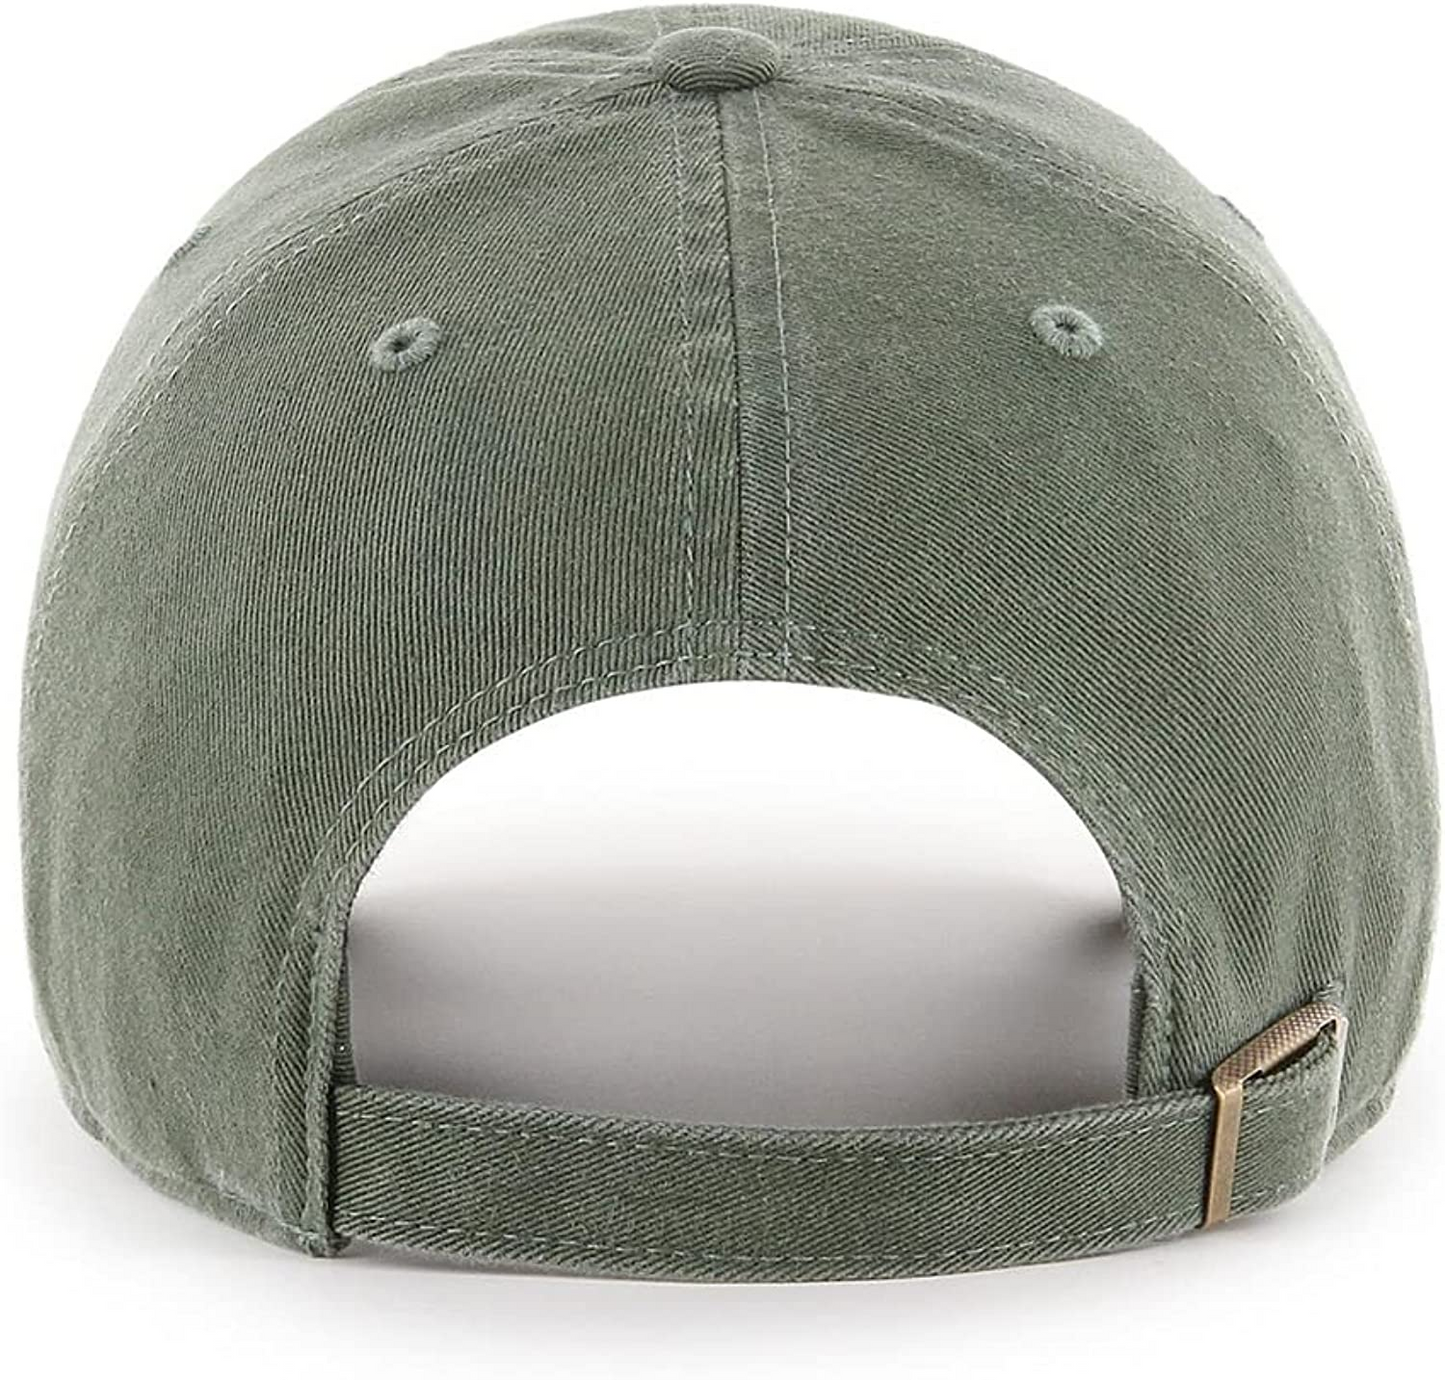 LOS ANGELES DODGERS ADJUSTABLE 47 BRAND CLEAN UP HAT - MOSS GREEN